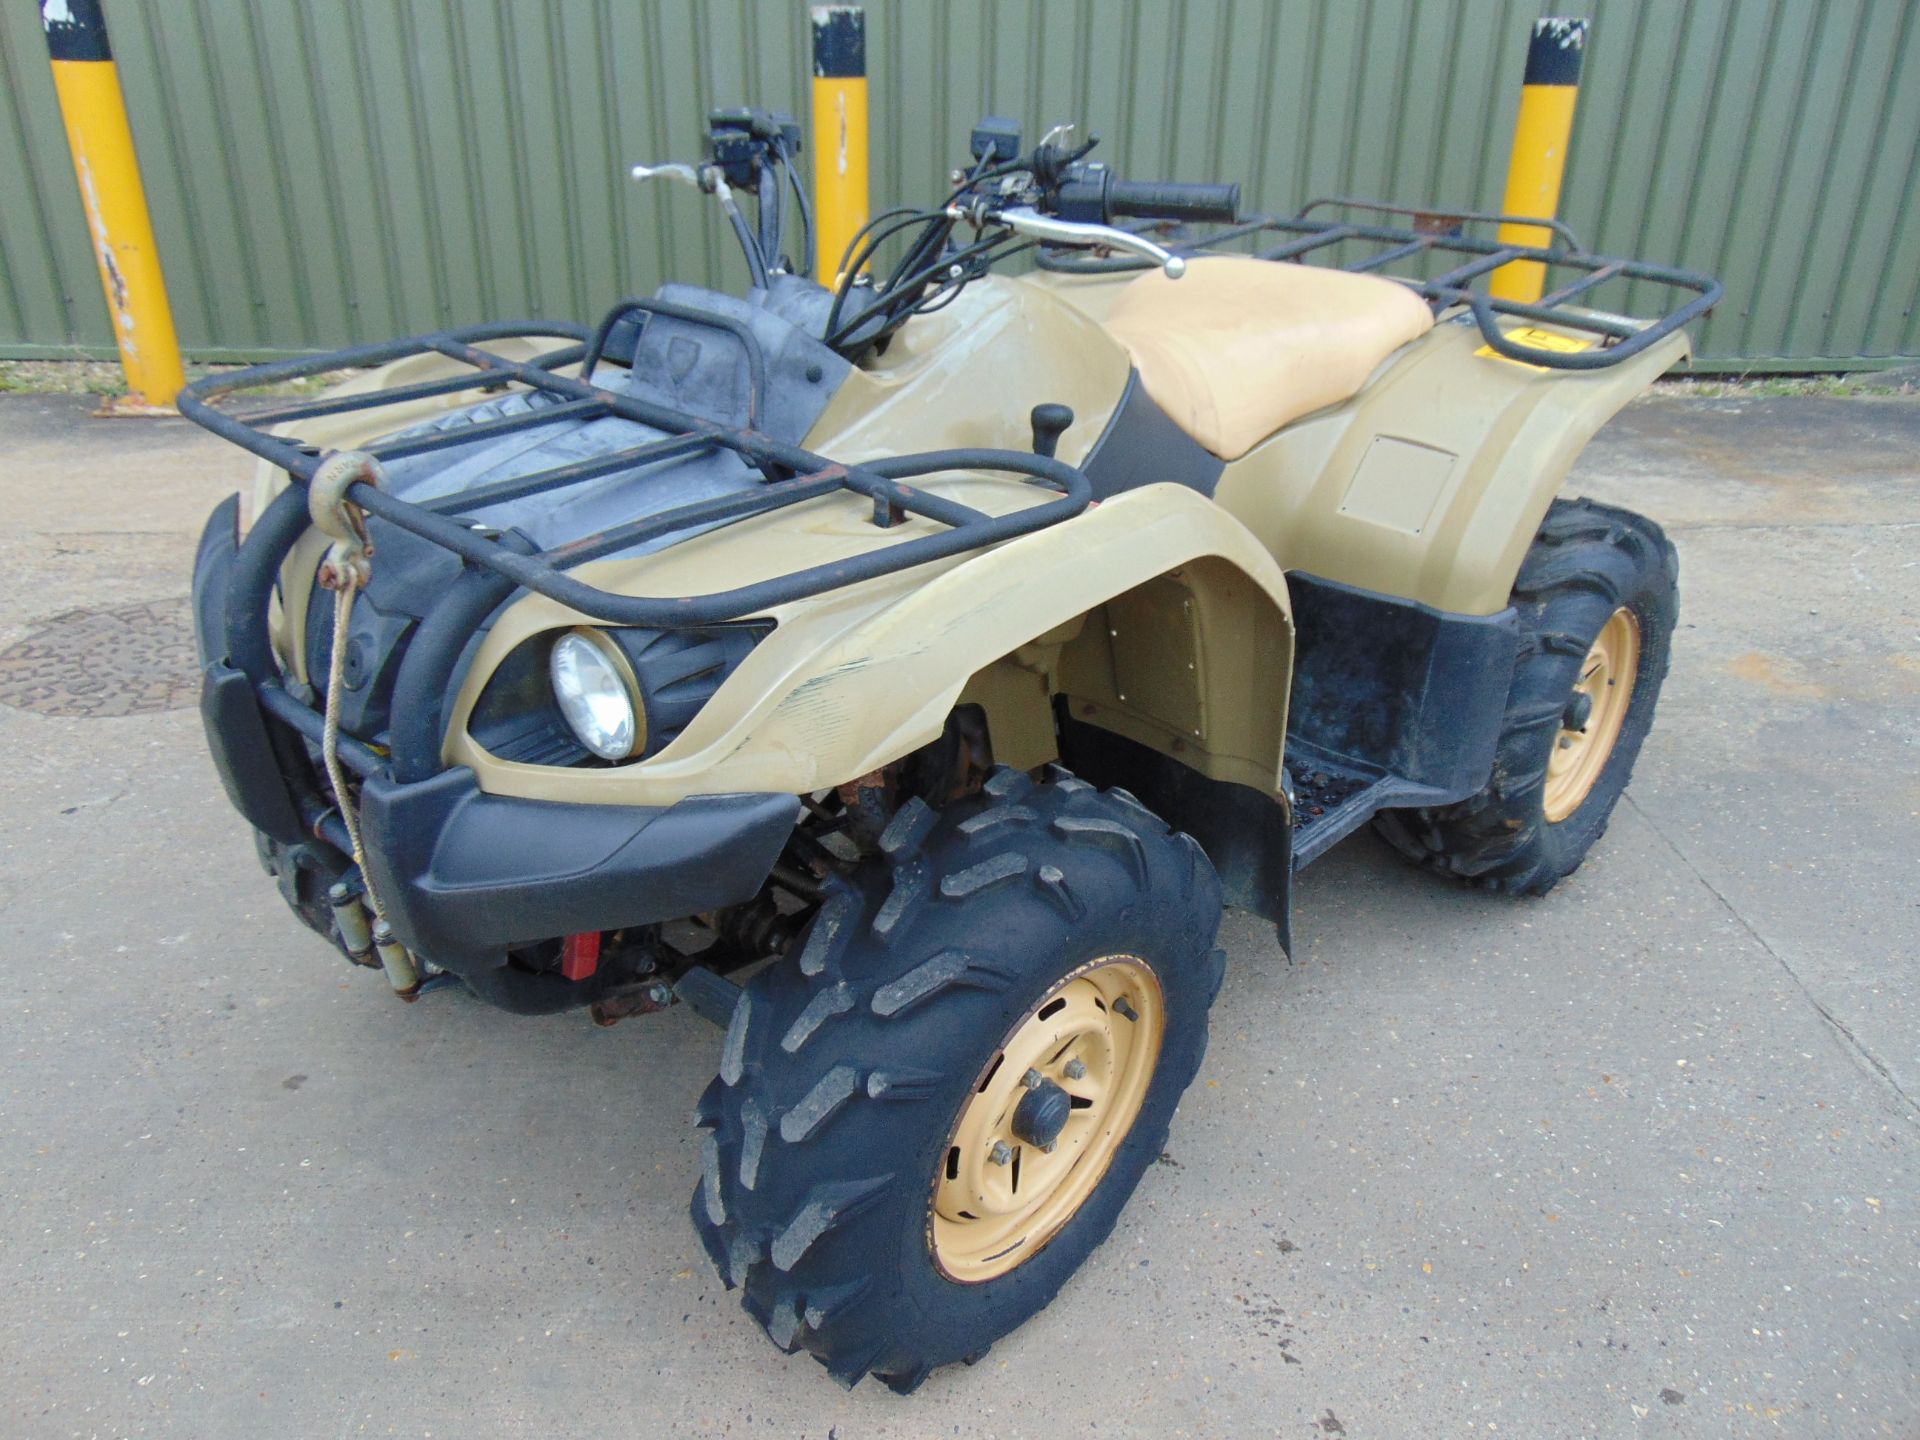 Recent Release Military Specification Yamaha Grizzly 450 4 x 4 ATV Quad Bike ONLY 59 HOURS!!! - Image 2 of 20